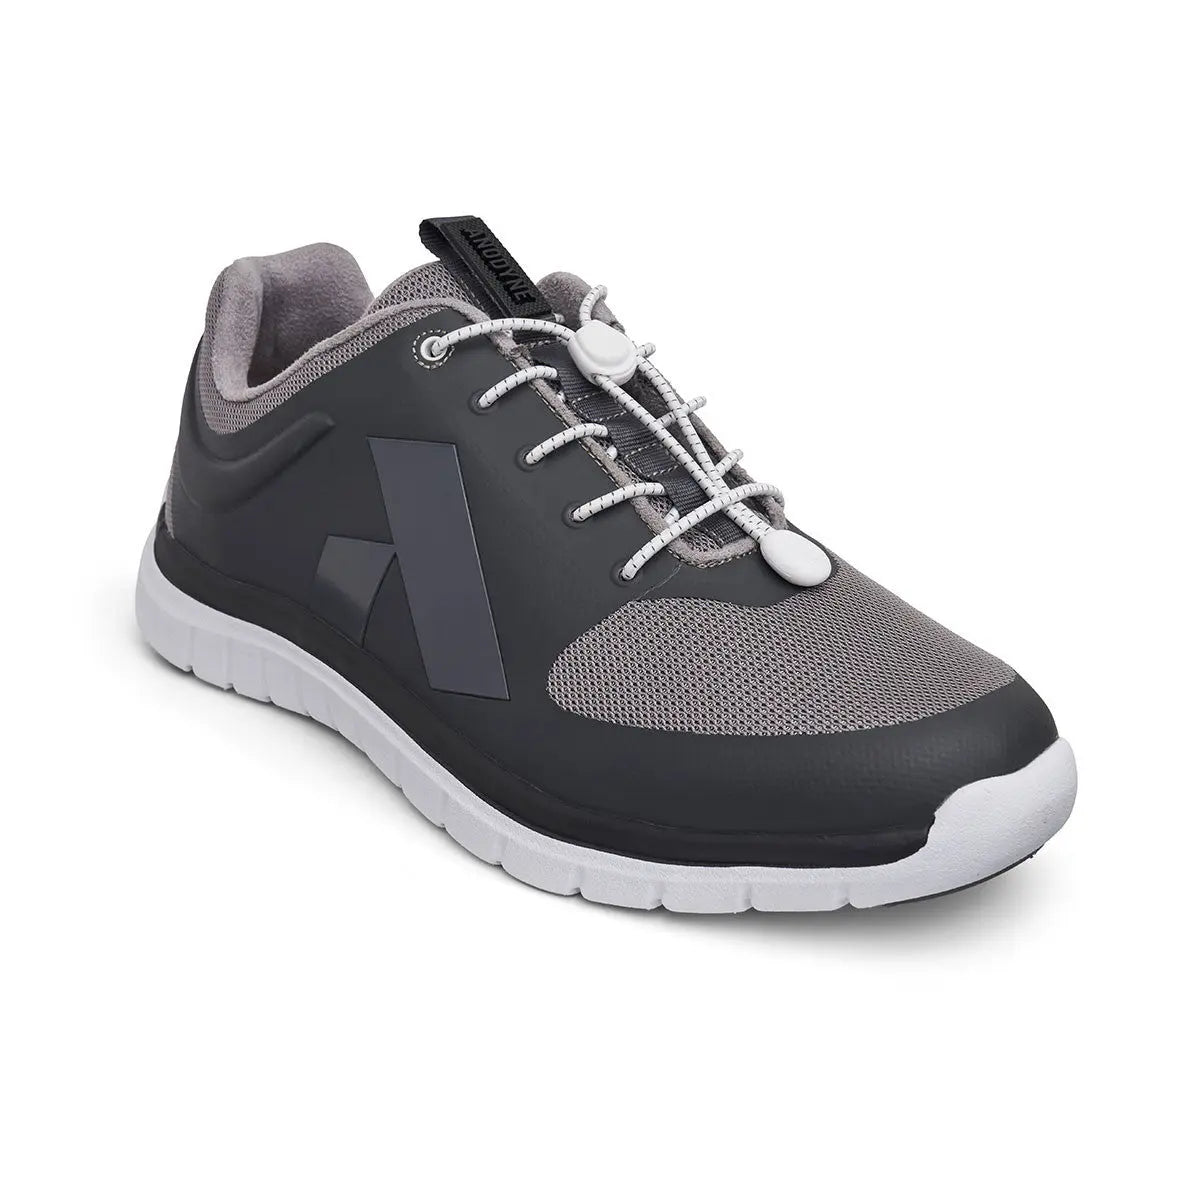 Anodyne Men's No.22 Sport Runner - Grey is designed with elastic lace closure to make it easier those who need extra help